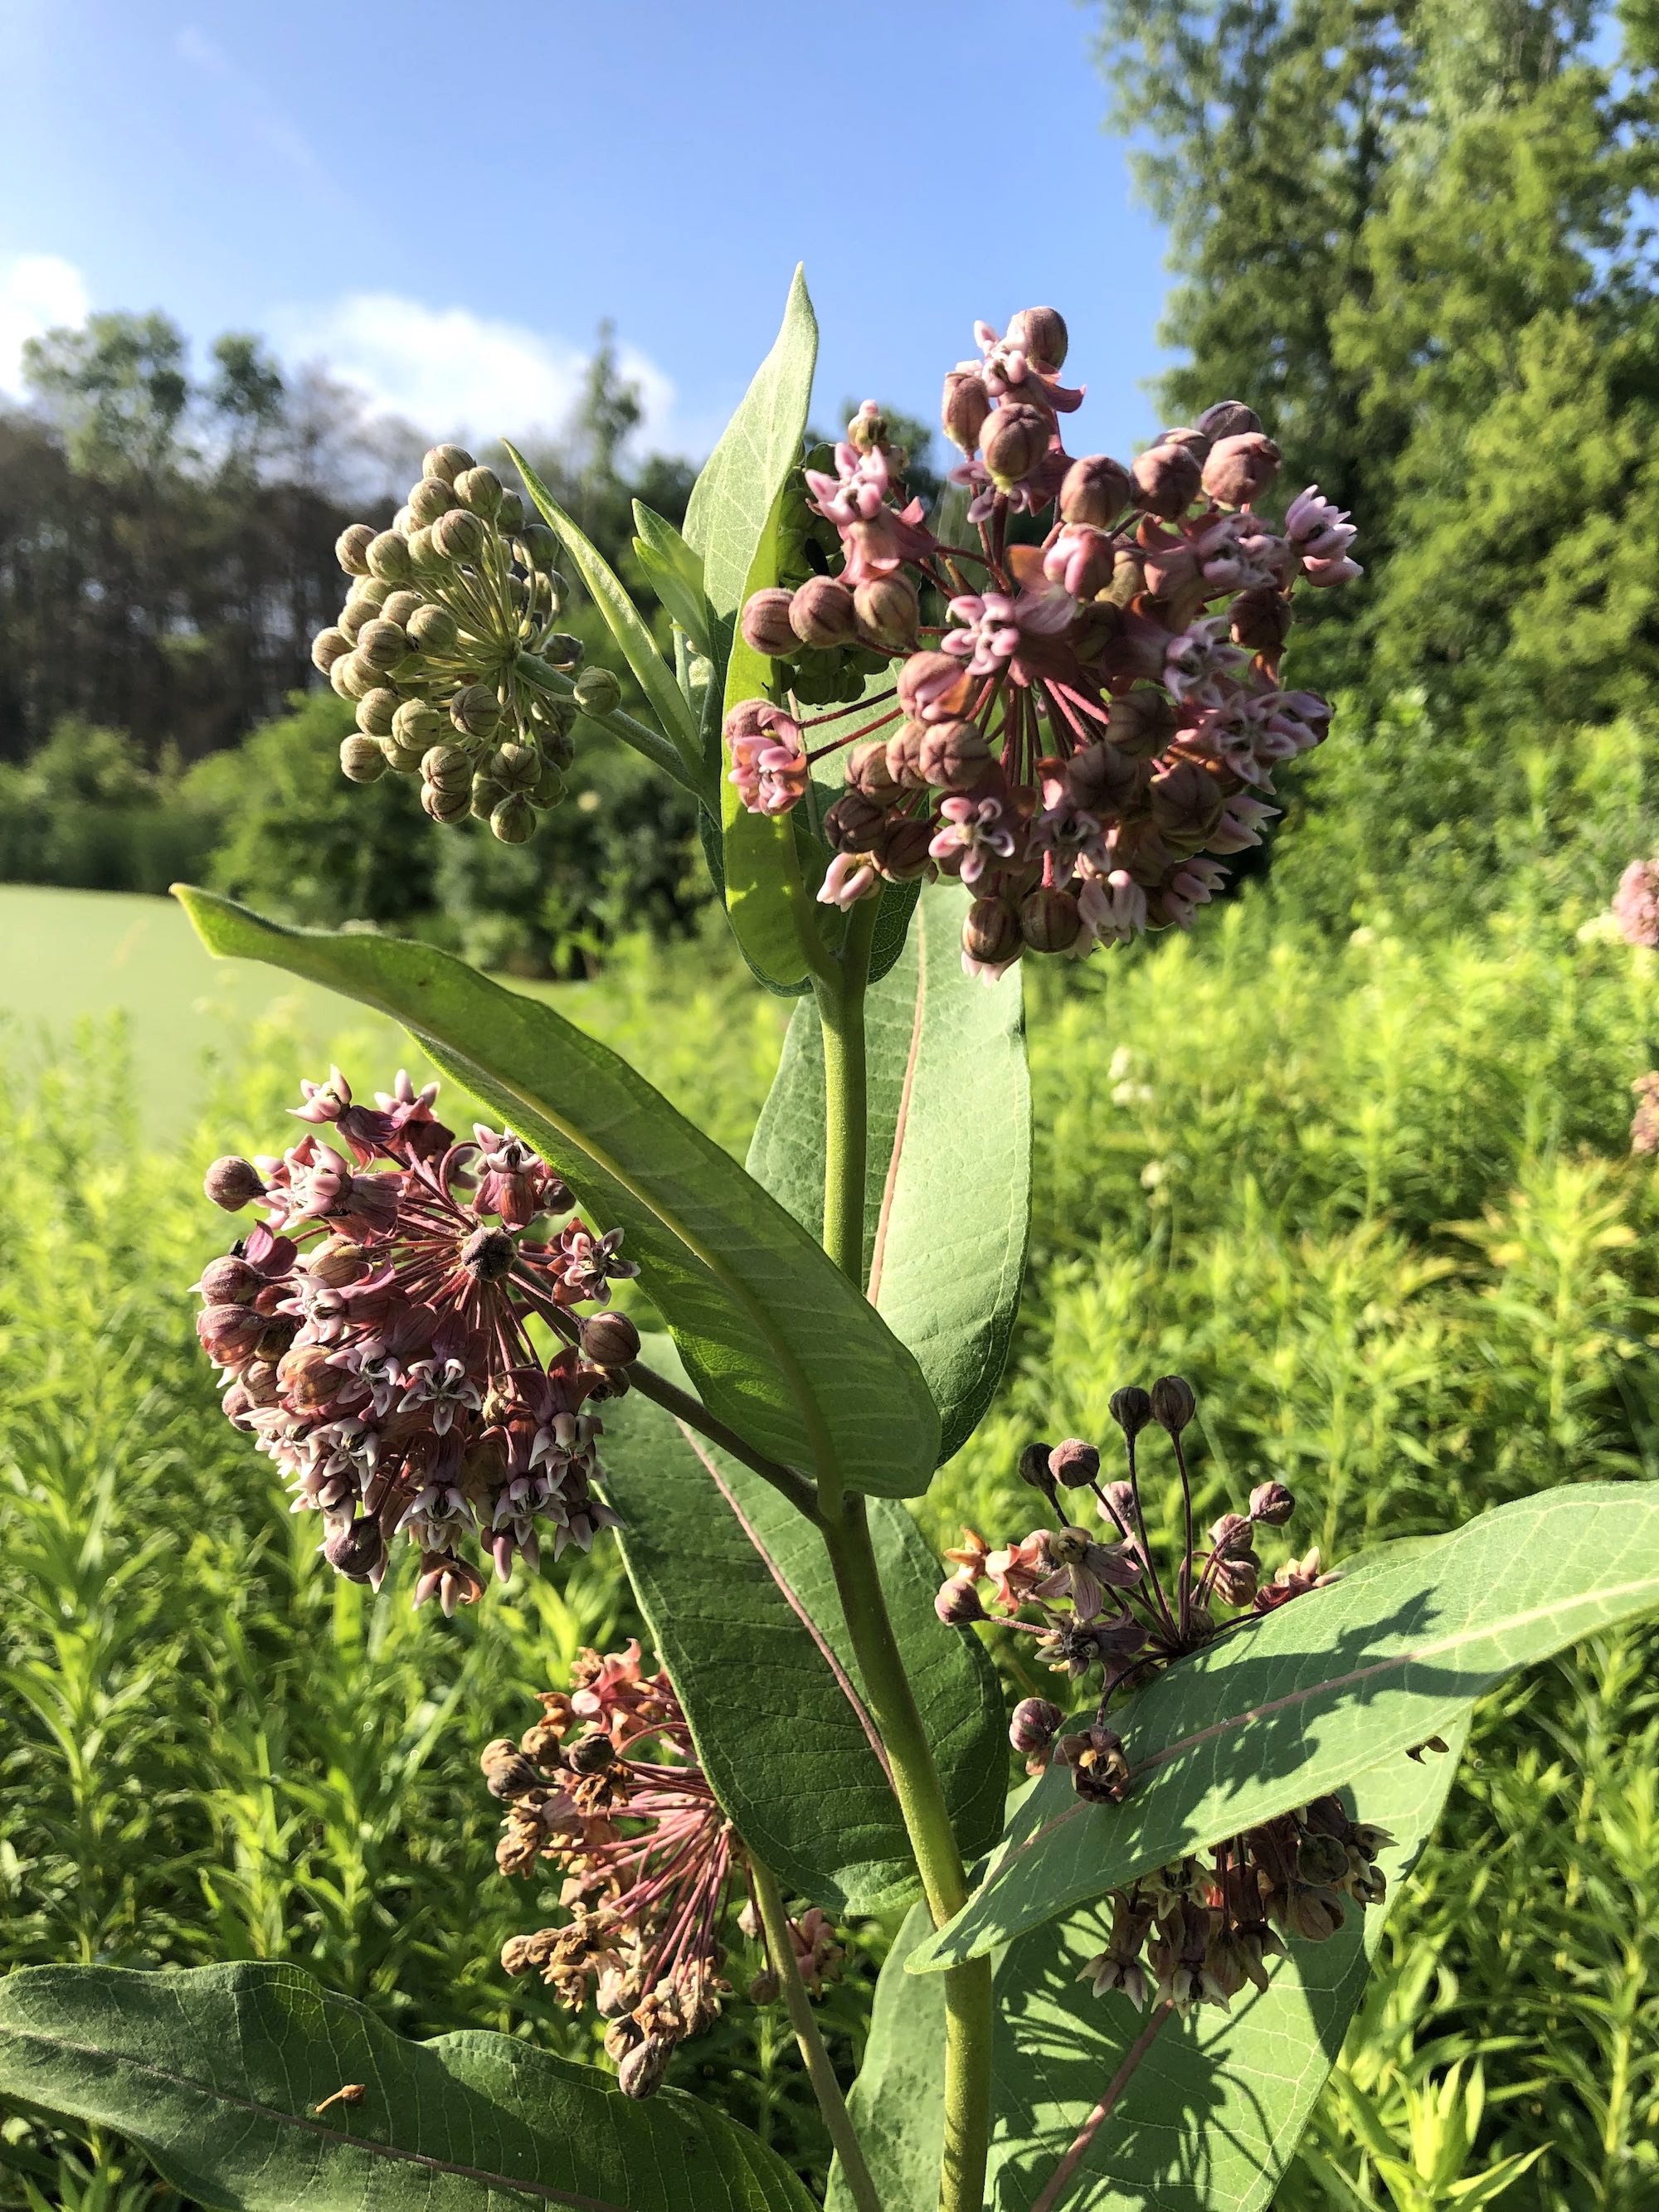 Common Milkweed on shore of Marion Dunn Pond on July 10, 2019.